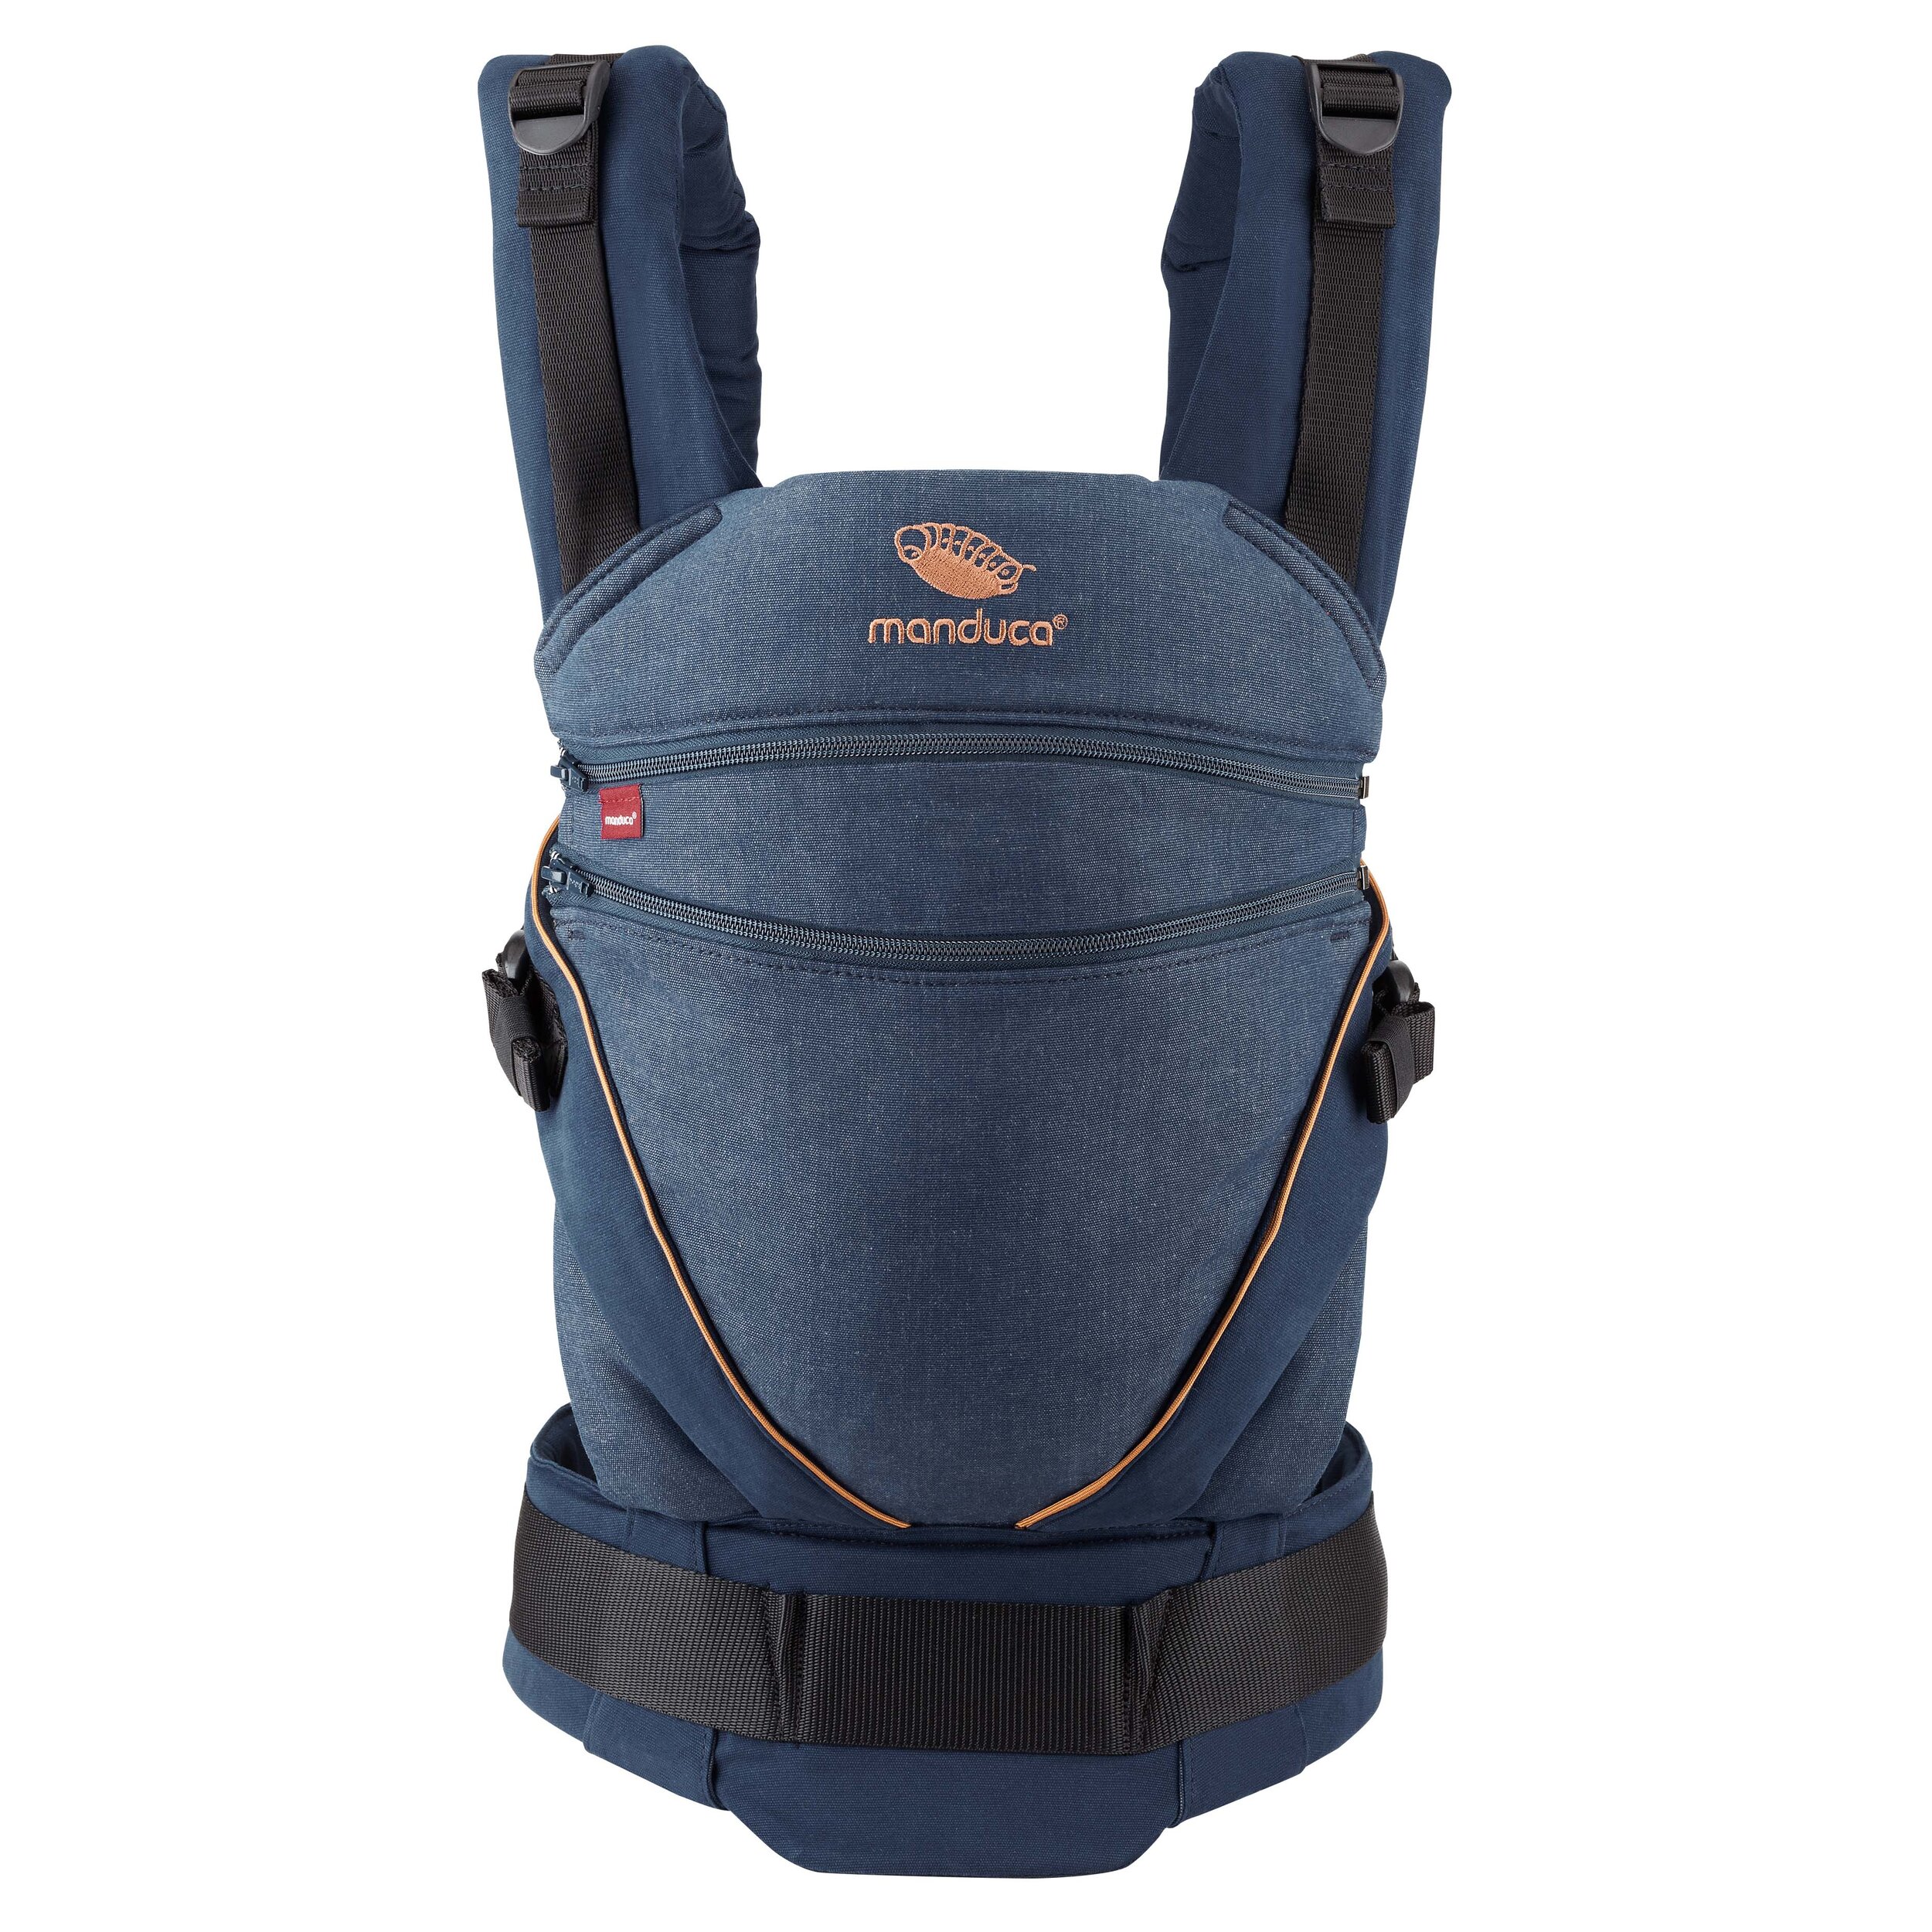 manduca-baby-carrier-xt-toffee-blue-babylove2000-prodotto.jpg